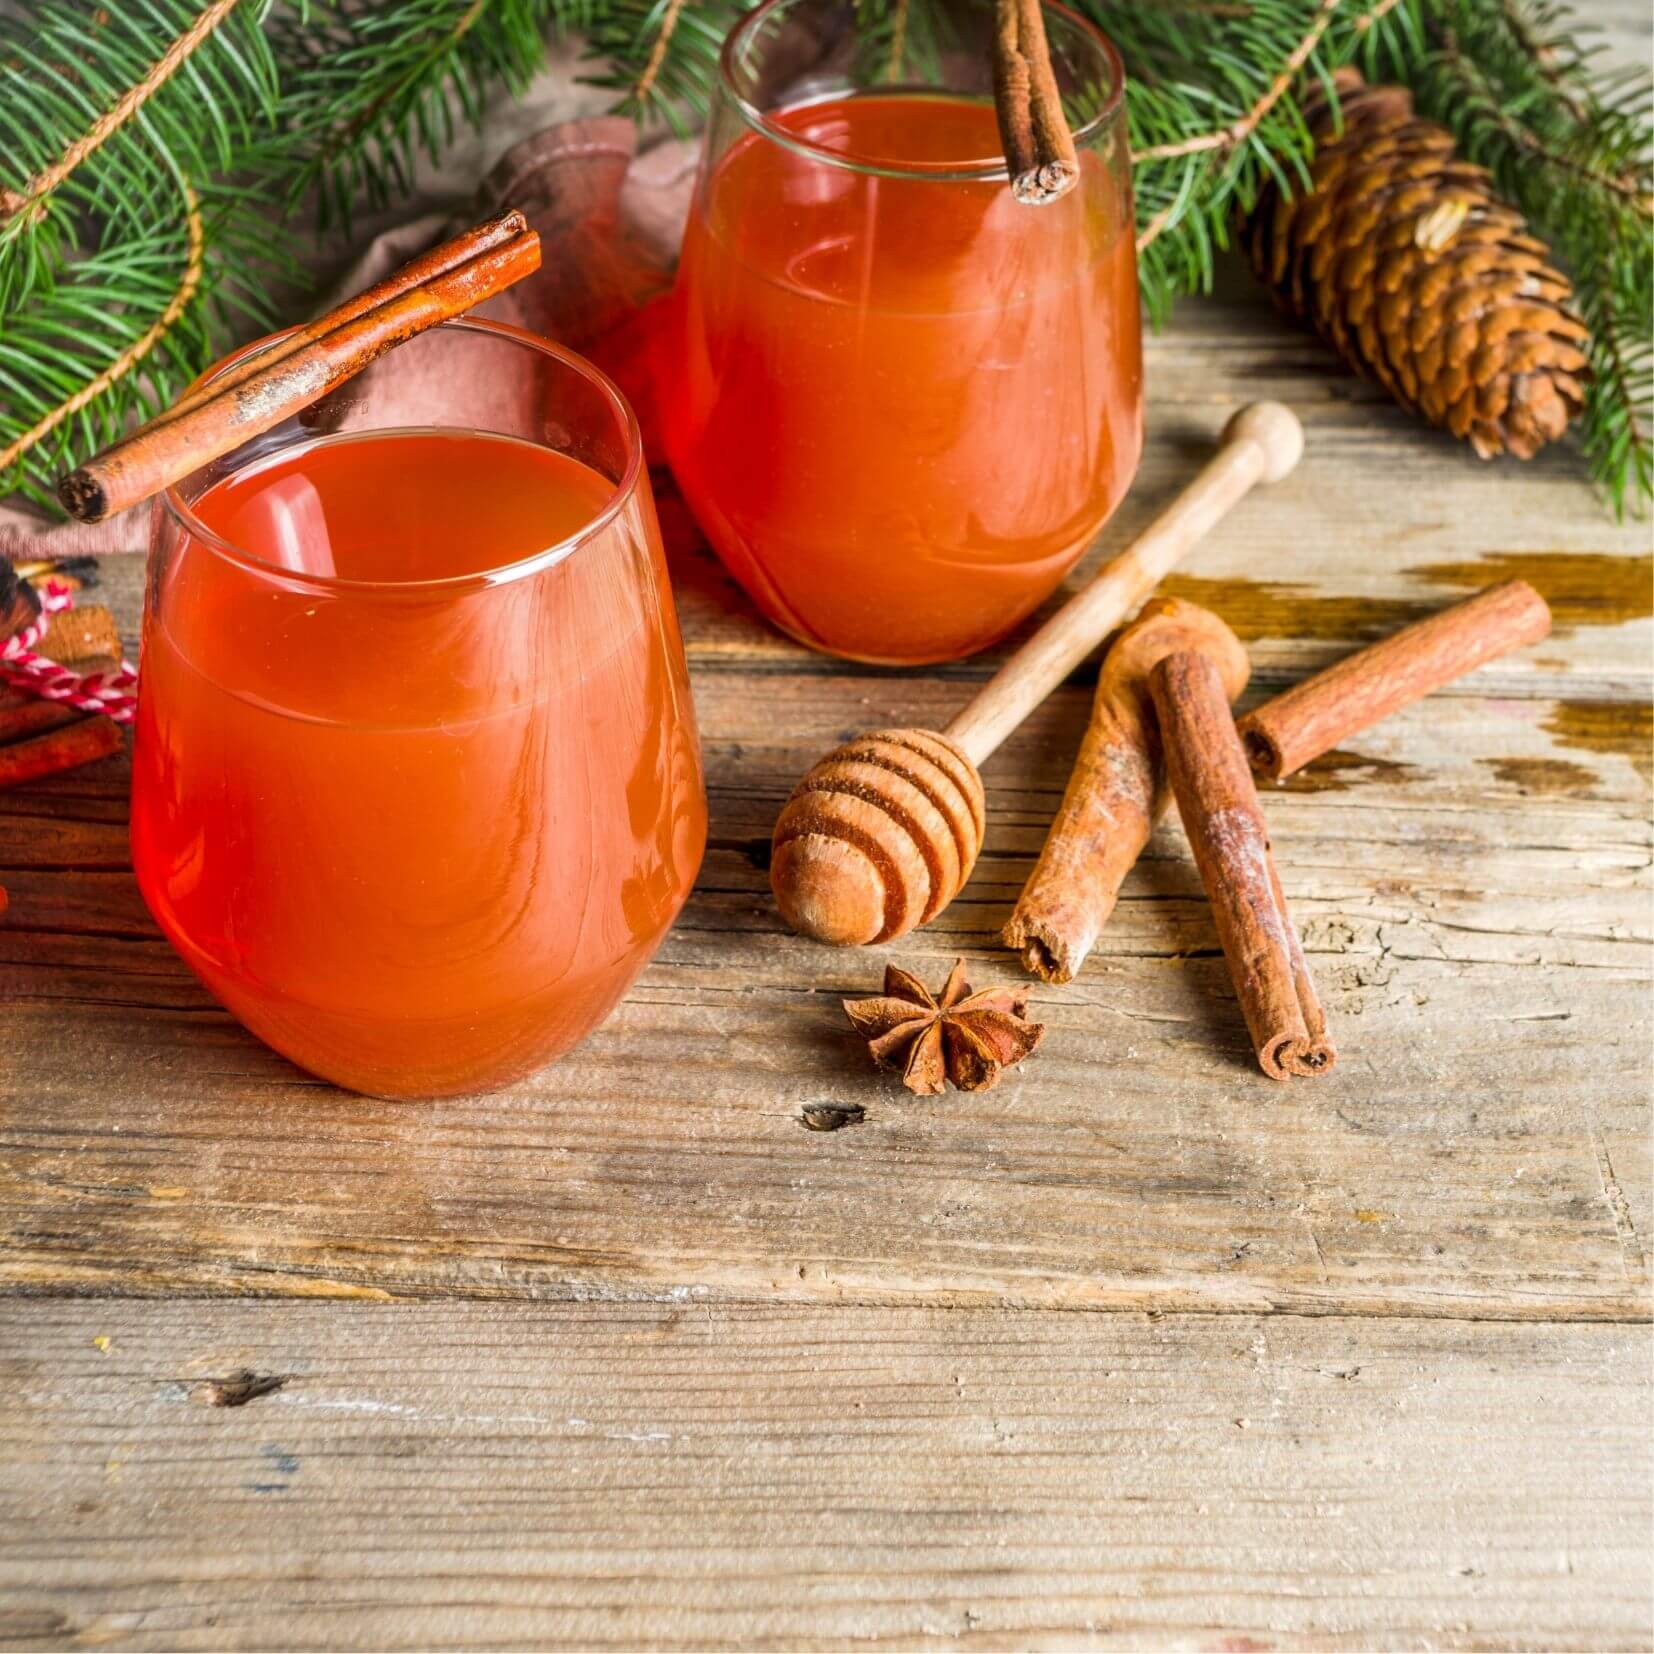 Cups of Wassail for Frisco's Wassail Days